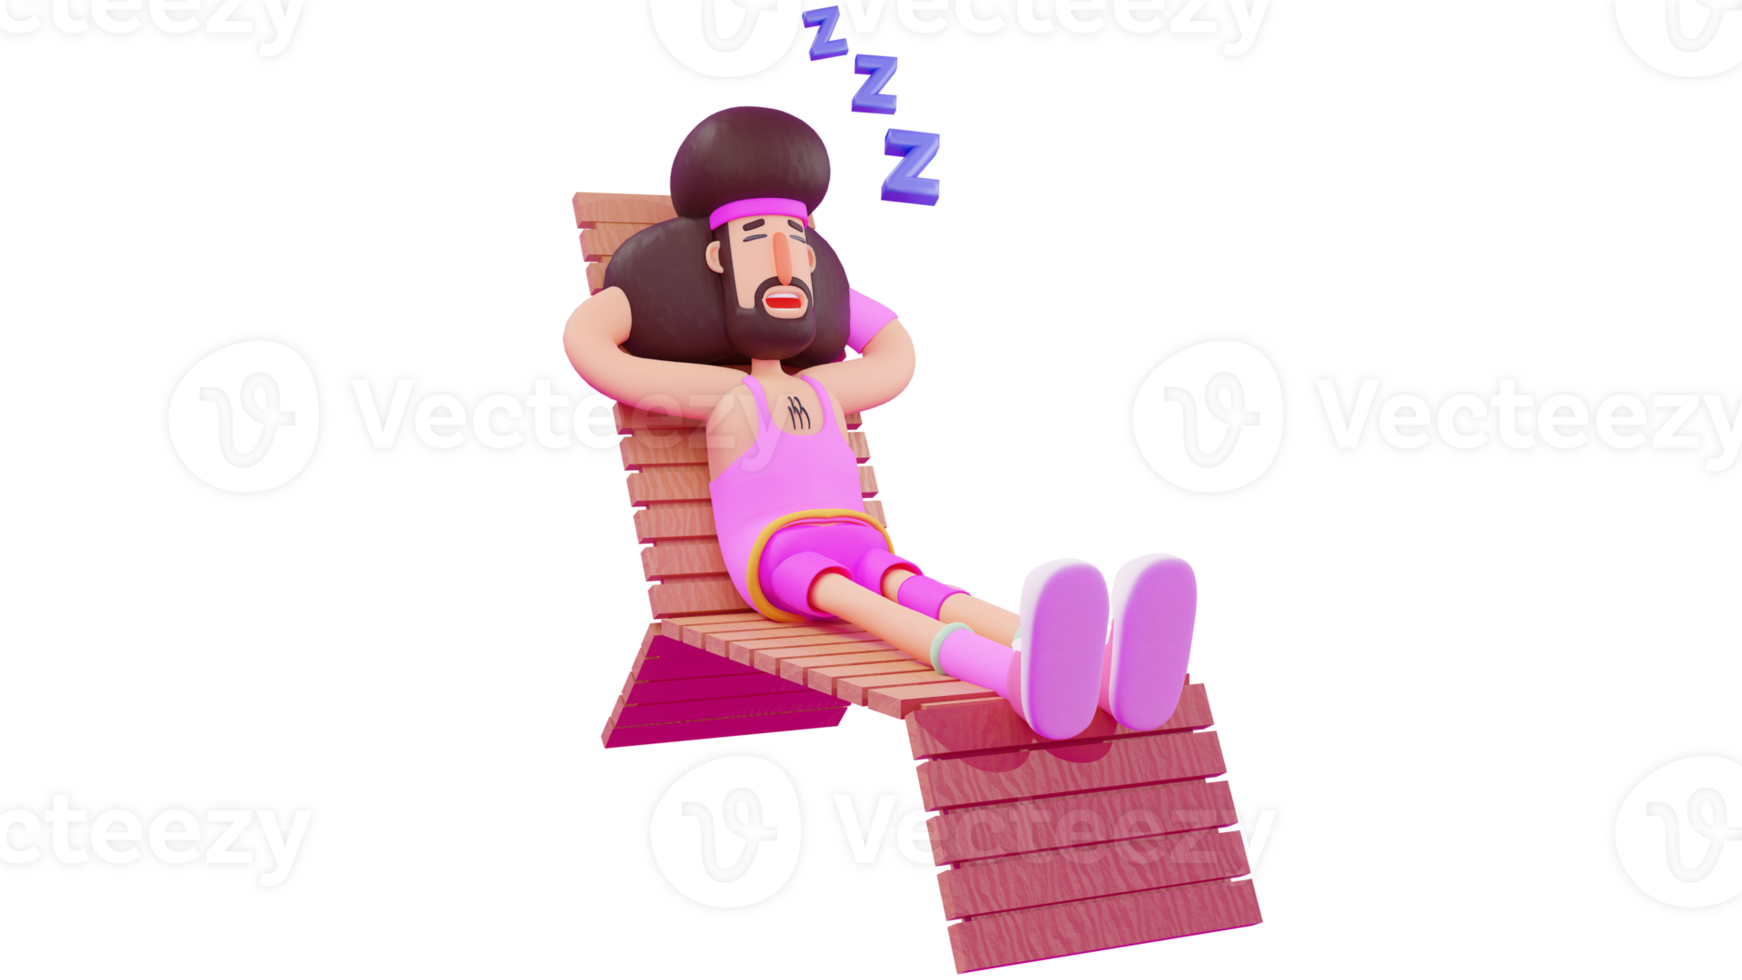 3D illustration. Tired Athlete 3D cartoon character. Athlete fall asleep on long wooden chair. Athlete feel tired with his busy activities. Athletes still wear pink costumes. 3D cartoon character png